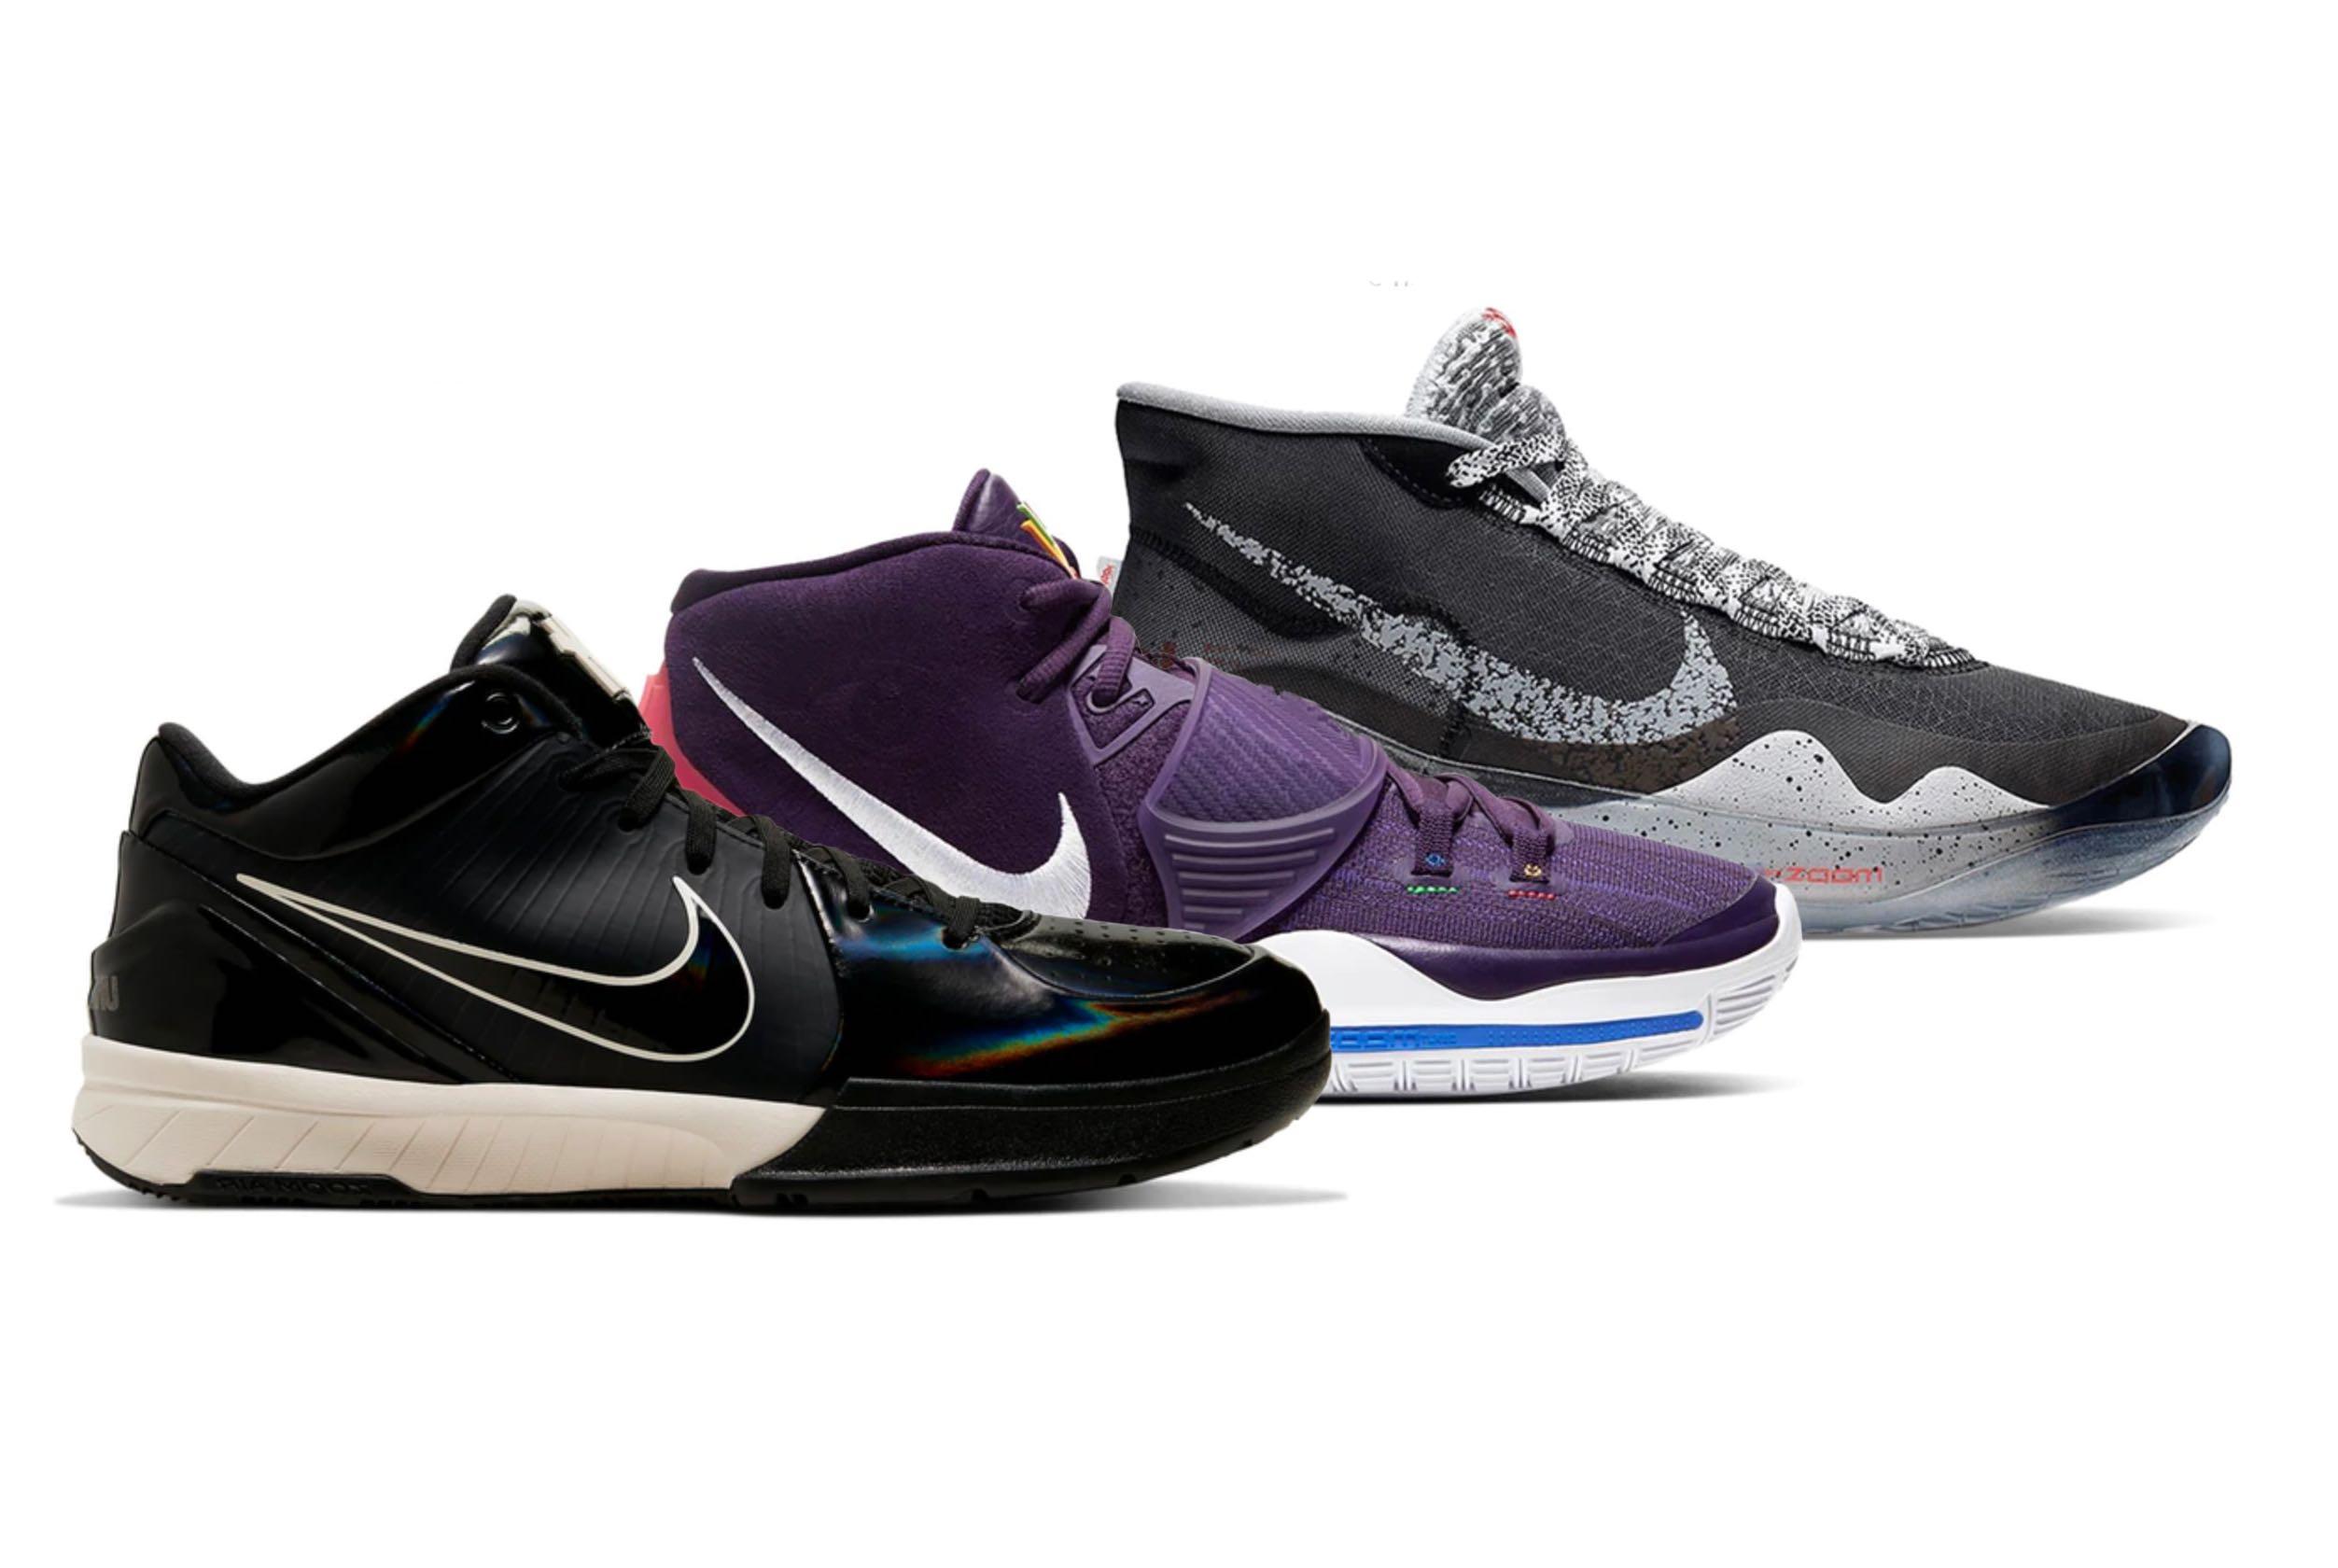 The Best Nike Basketball Shoes In 2020 - StockX News